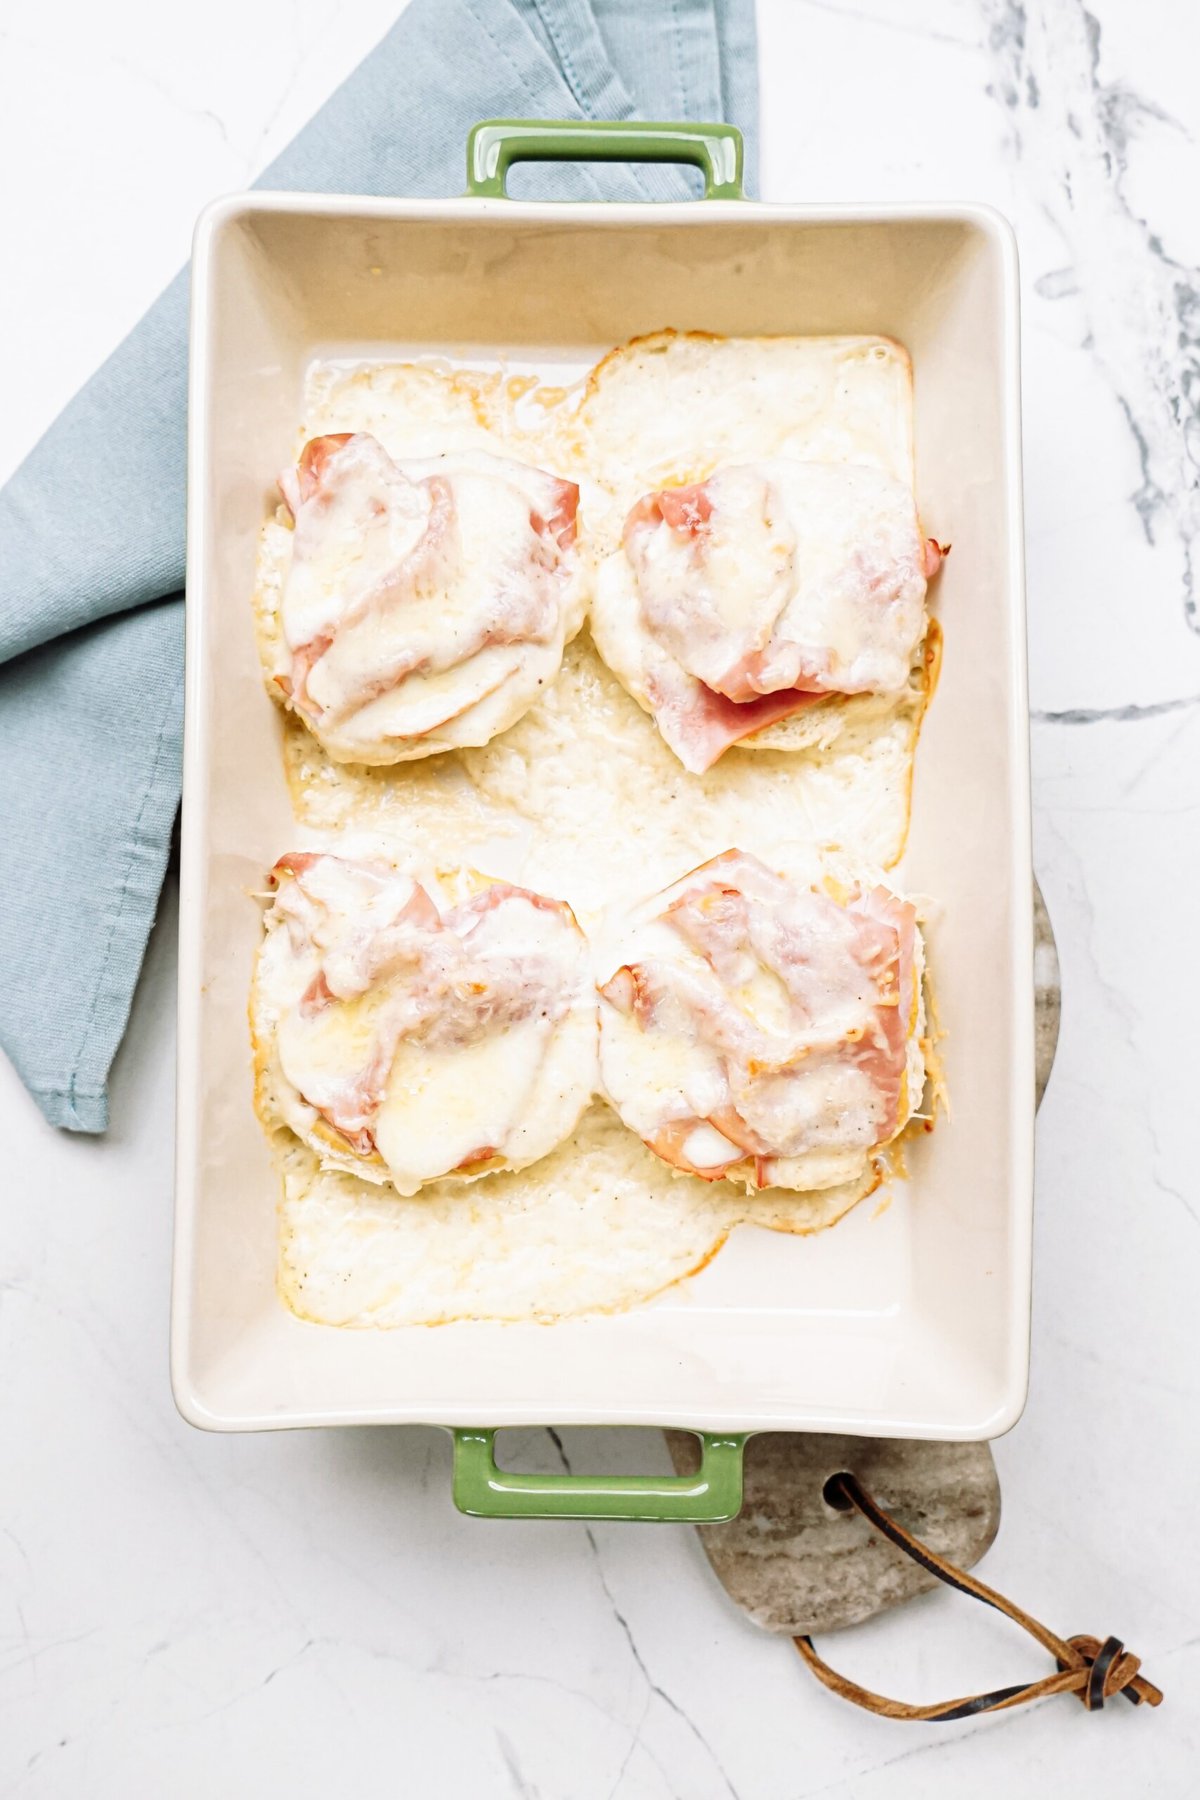 Open-faced sandwiches with ham and melted cheese in a baking dish.